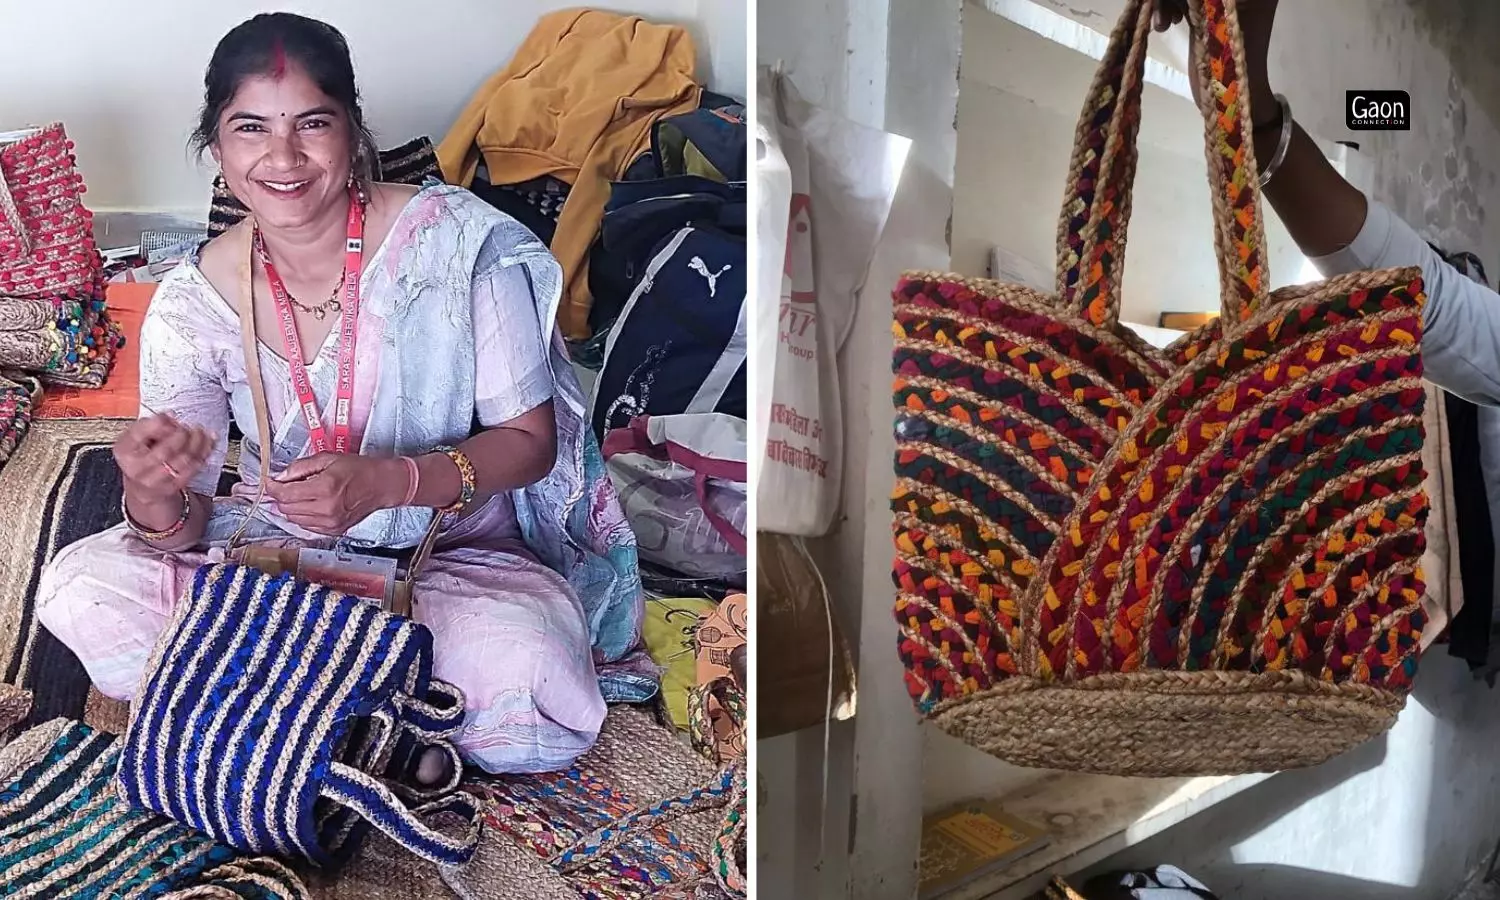 She studied till class 9, but is now a businesswoman who supports 200 rural women